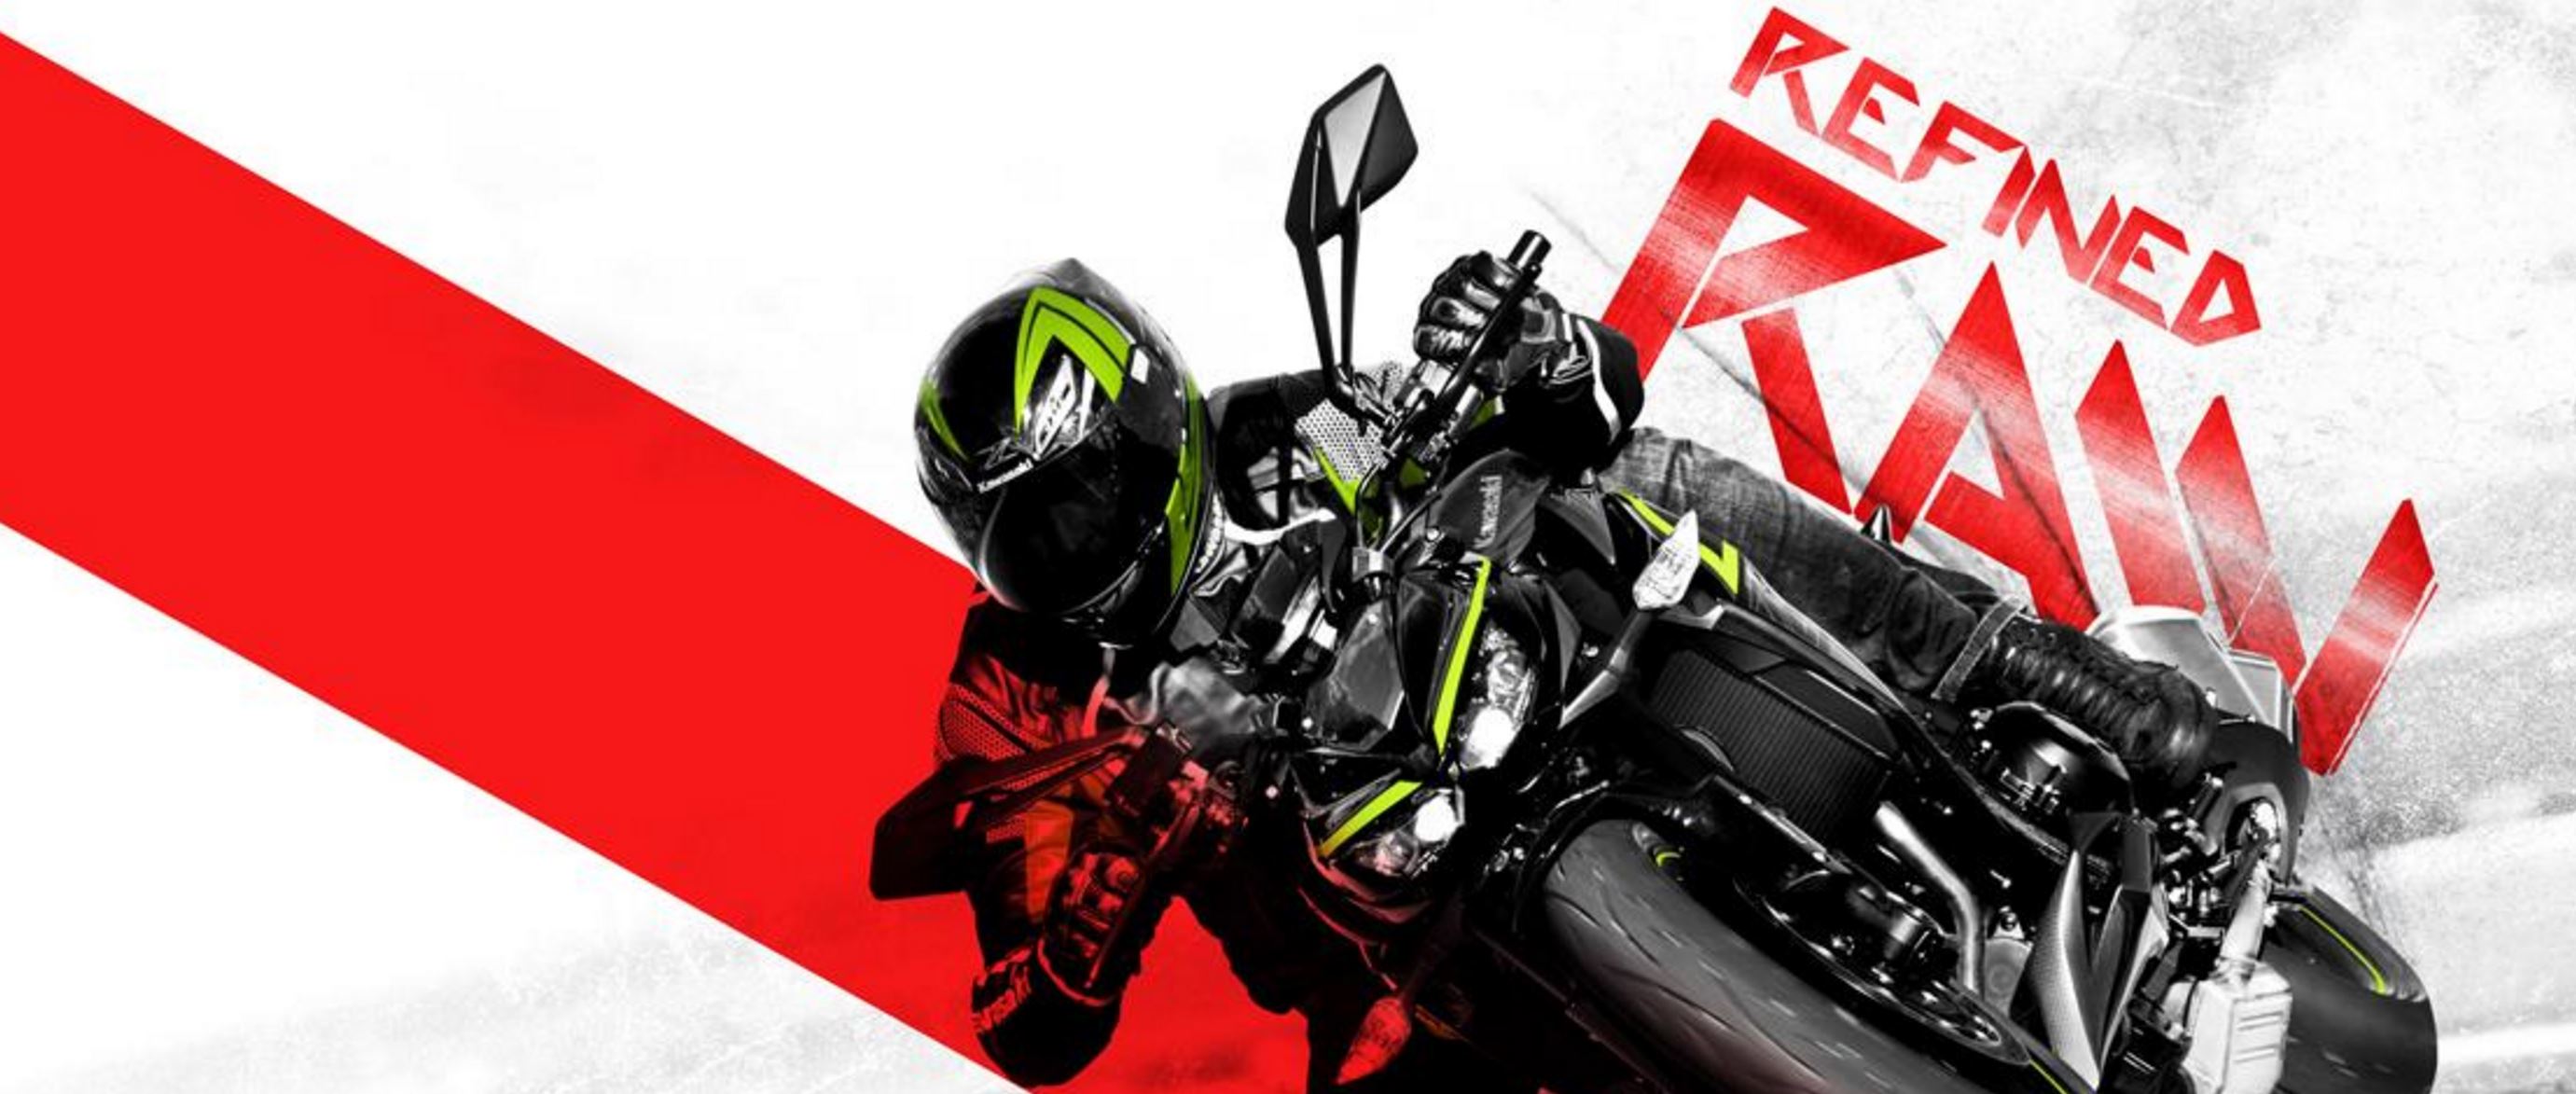 2017 Kawasaki Z1000 R Edition Officially Unleashed